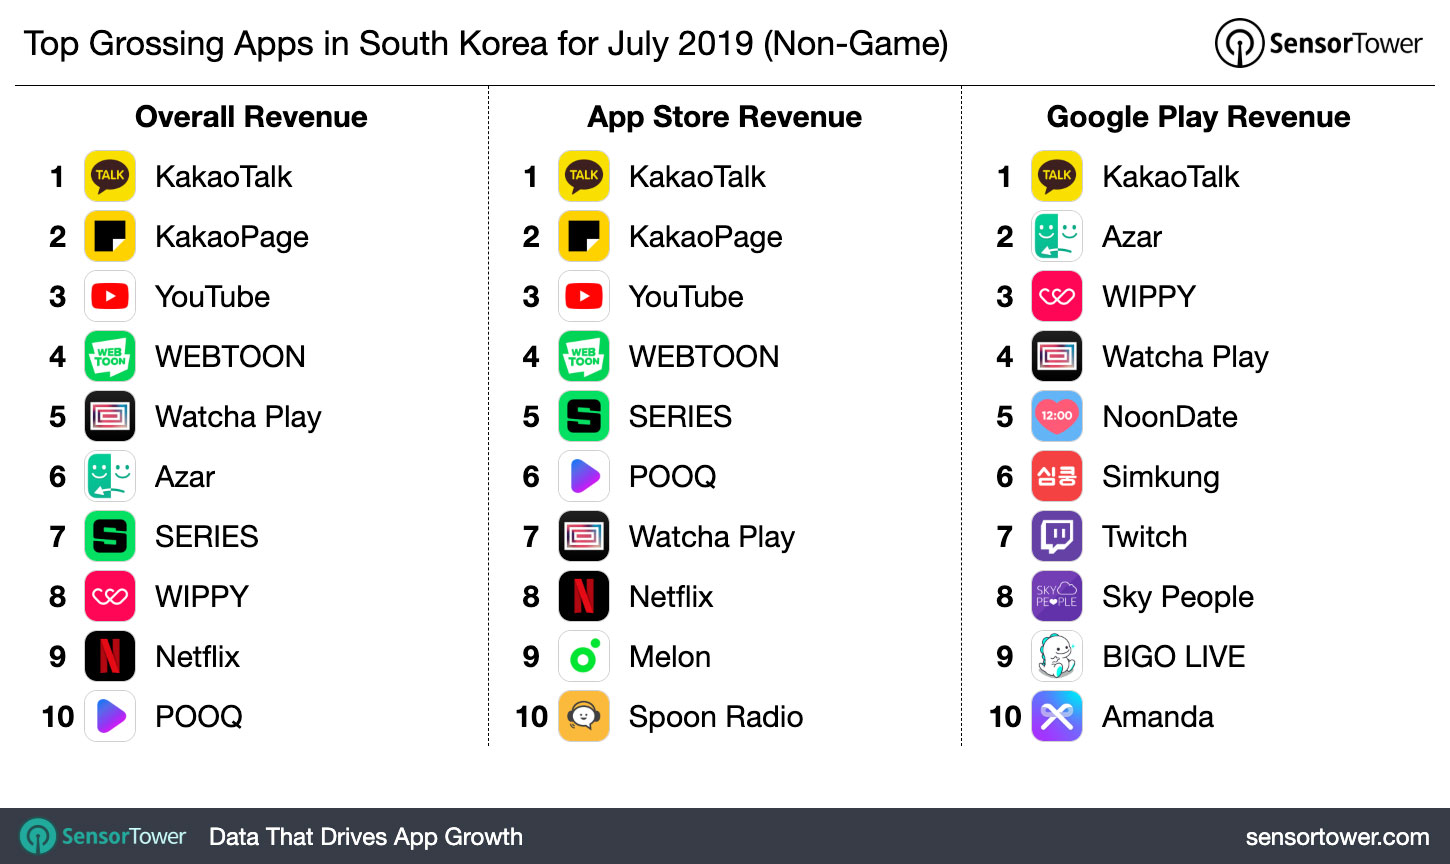 Top Grossing Apps in South Korea for July 2019